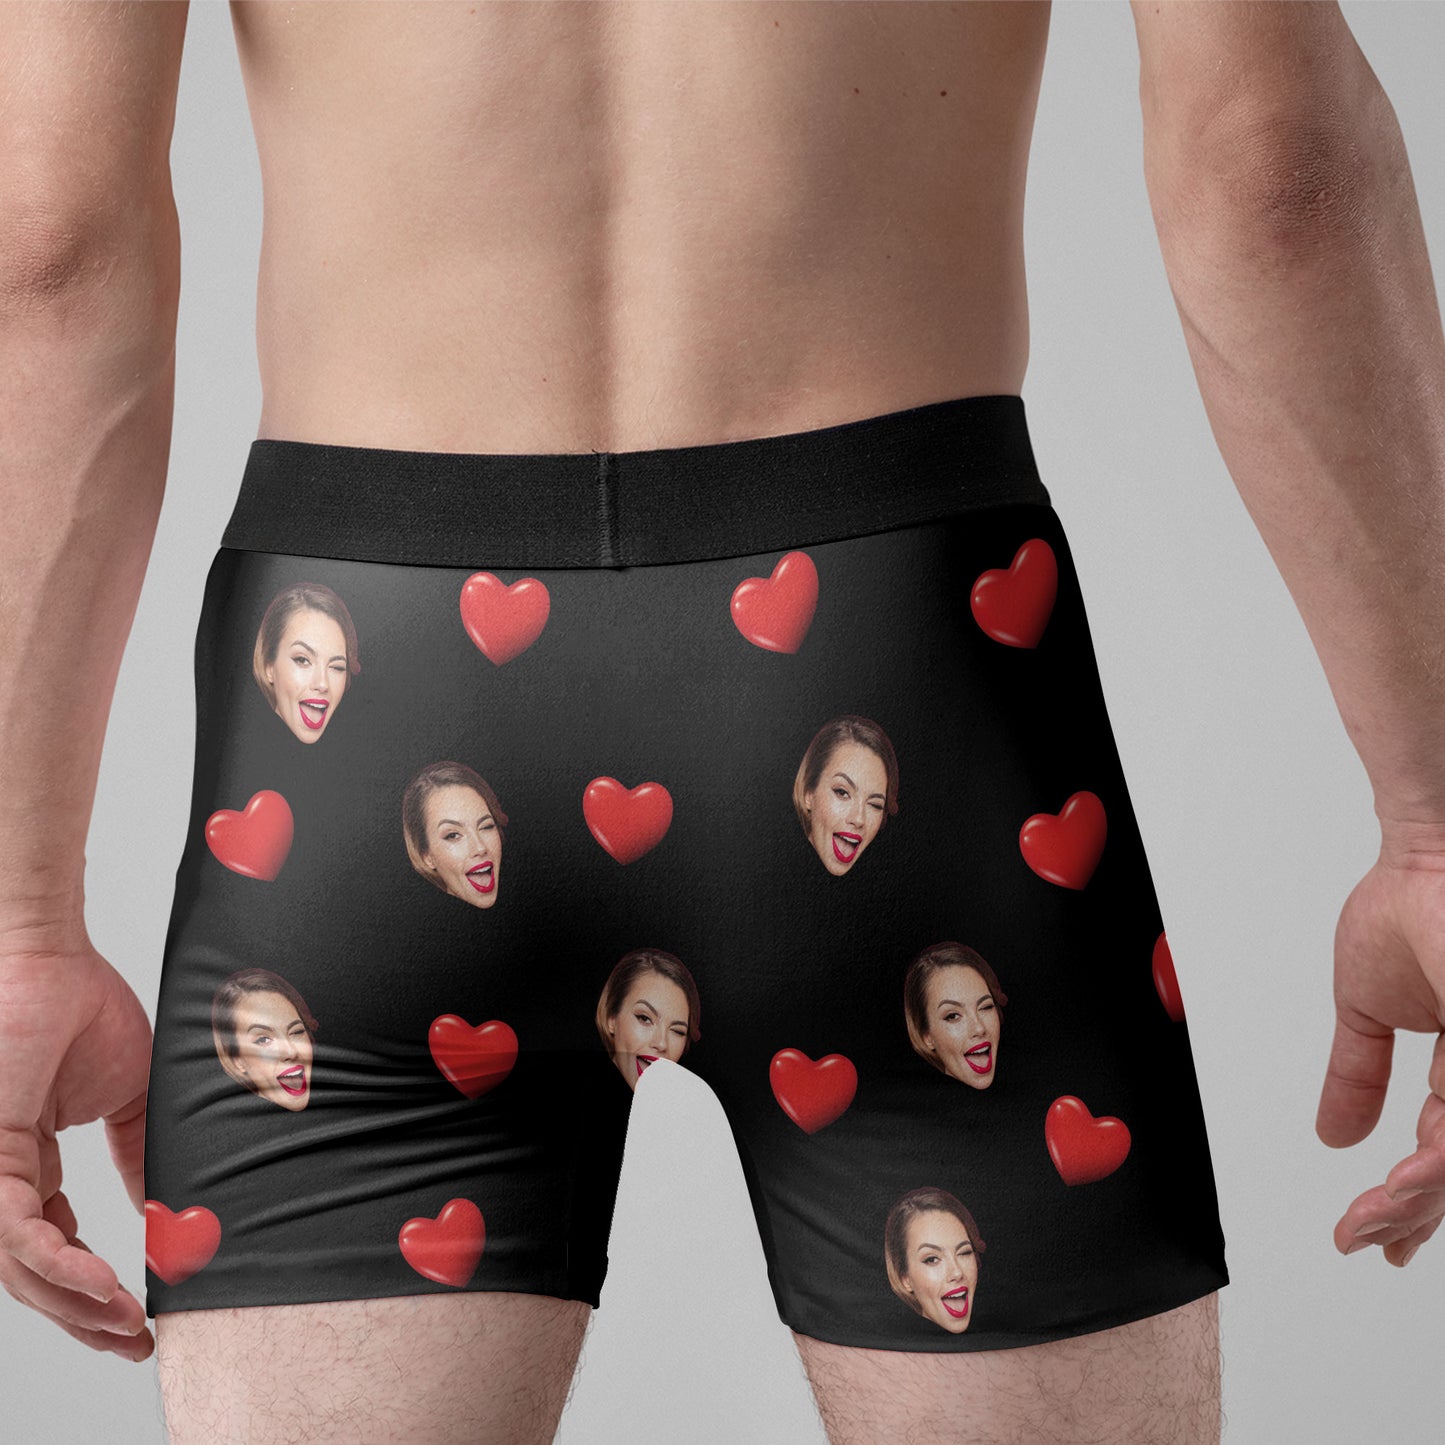 You Can Expect A Few Inches Tonight - Personalized Photo Men's Boxer Briefs